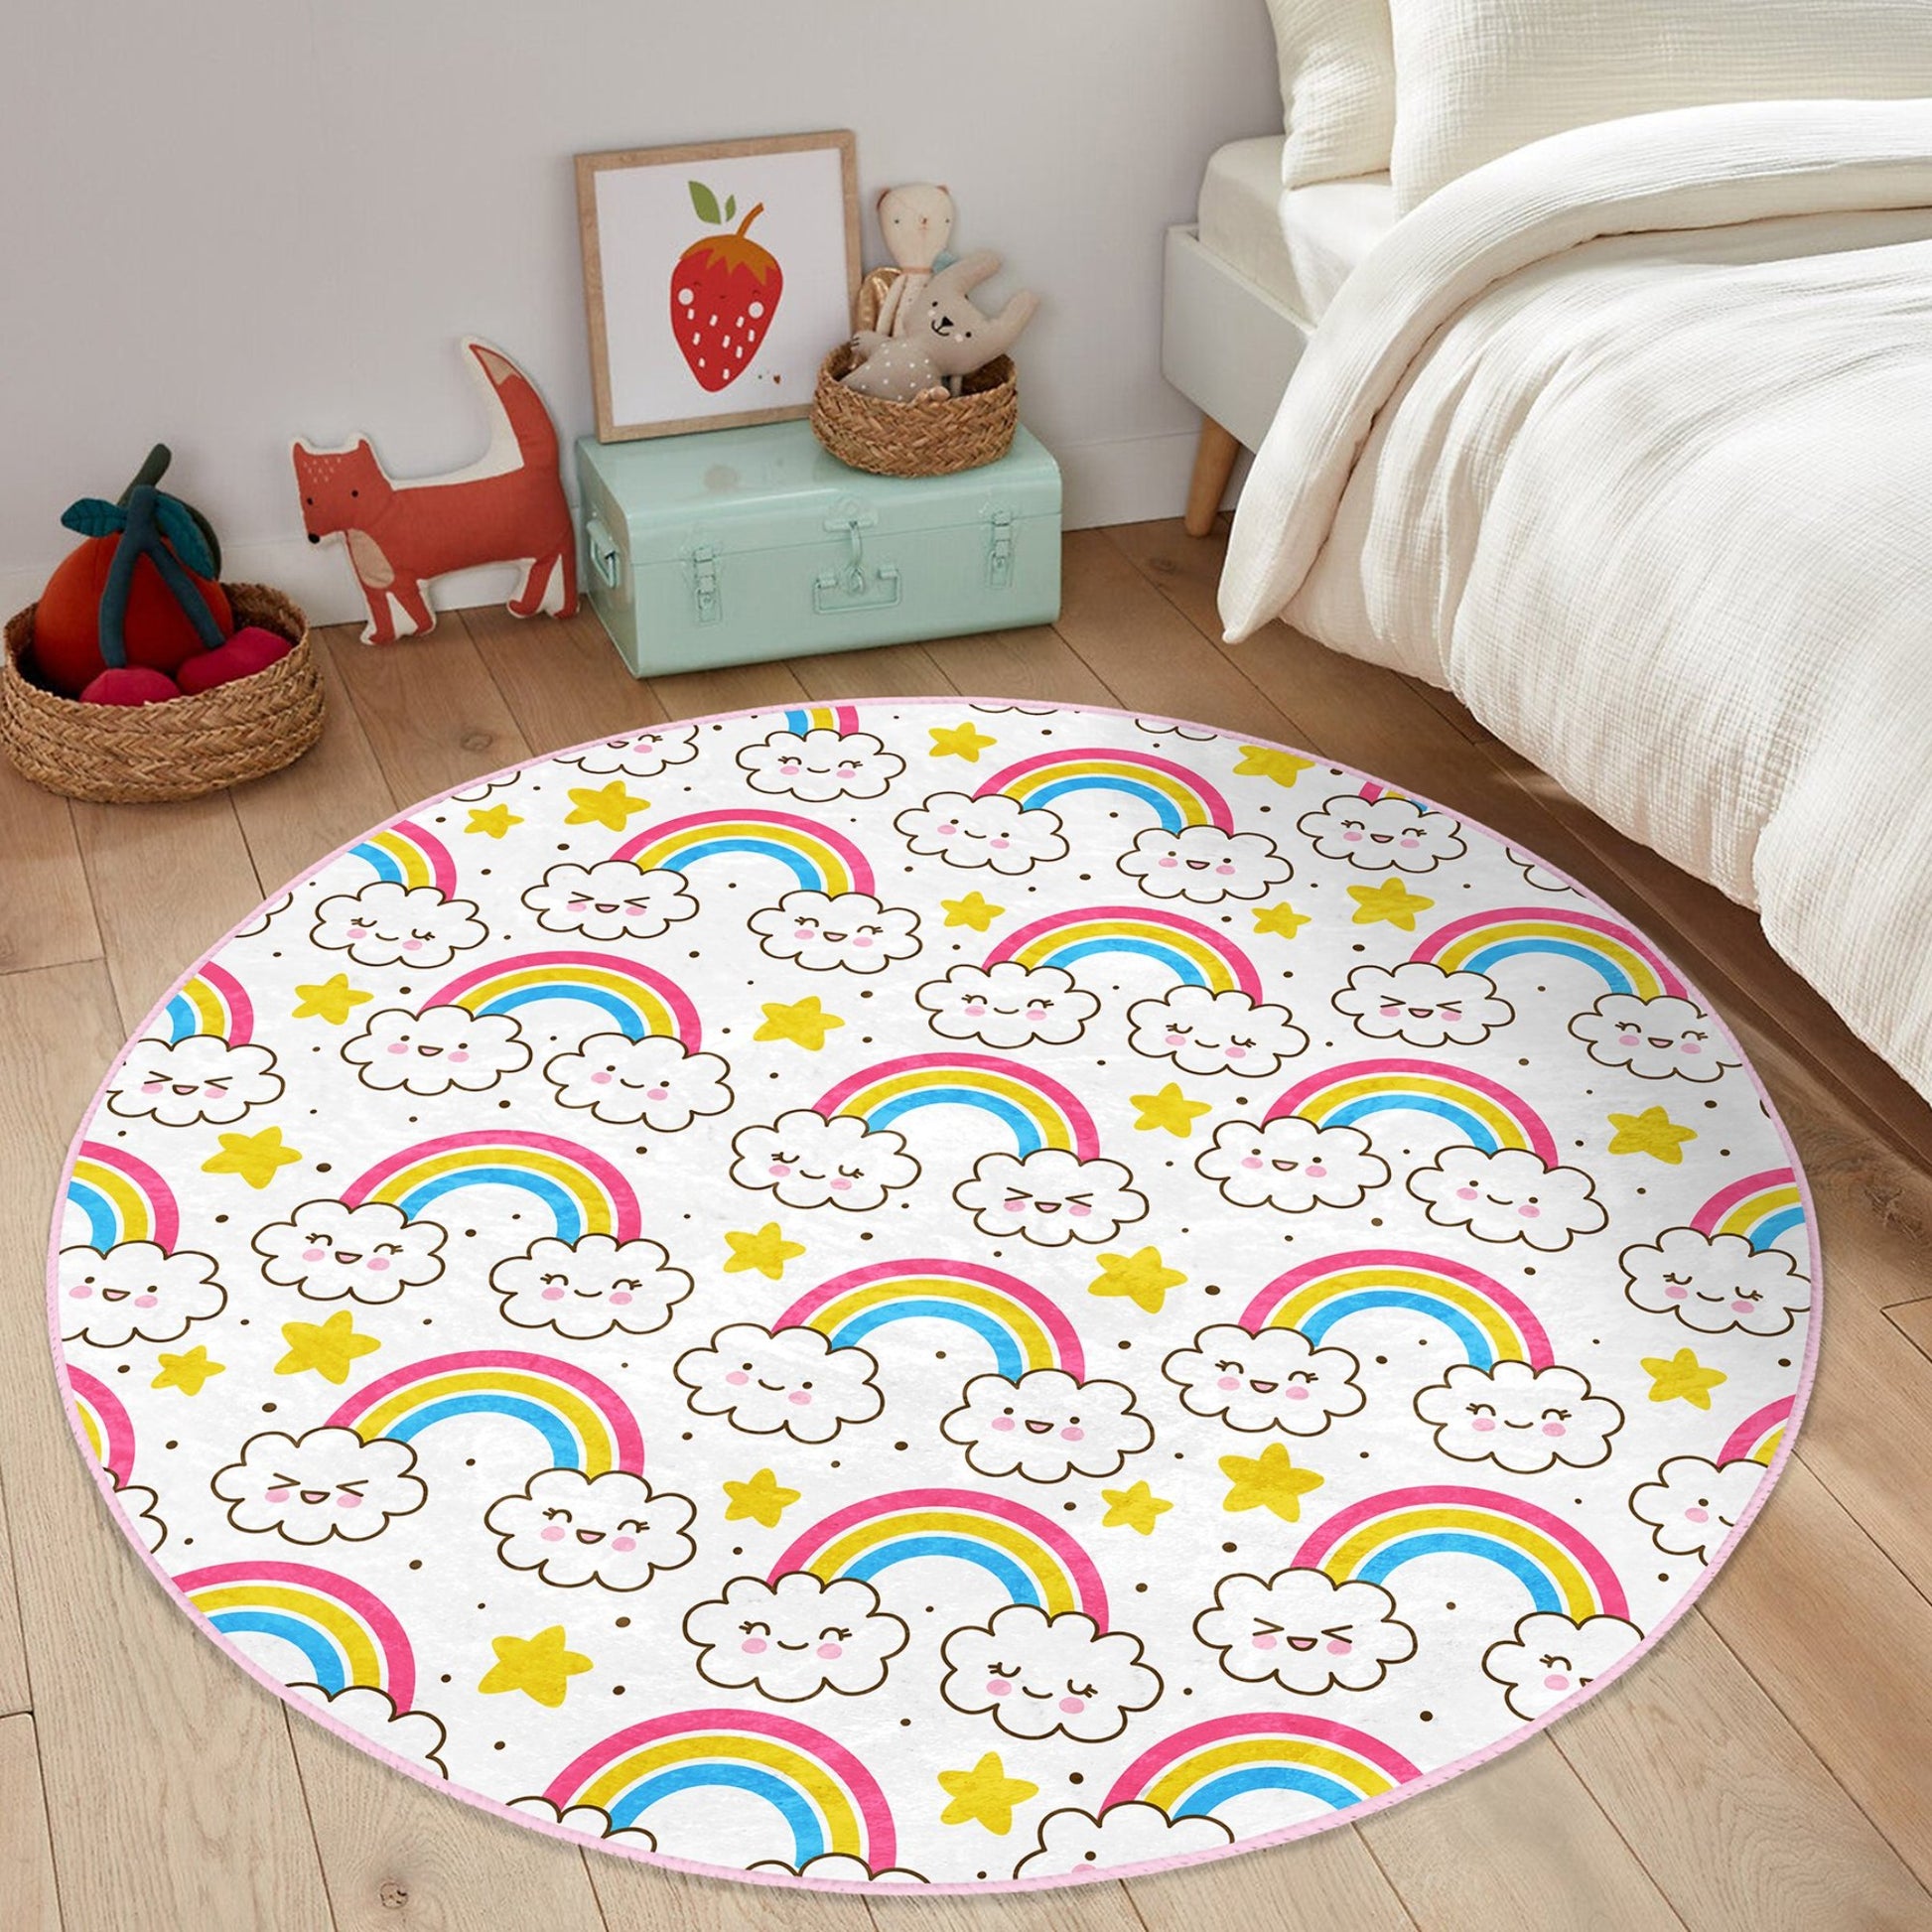 Rug with Cheerful Cloud and Rainbow Illustration